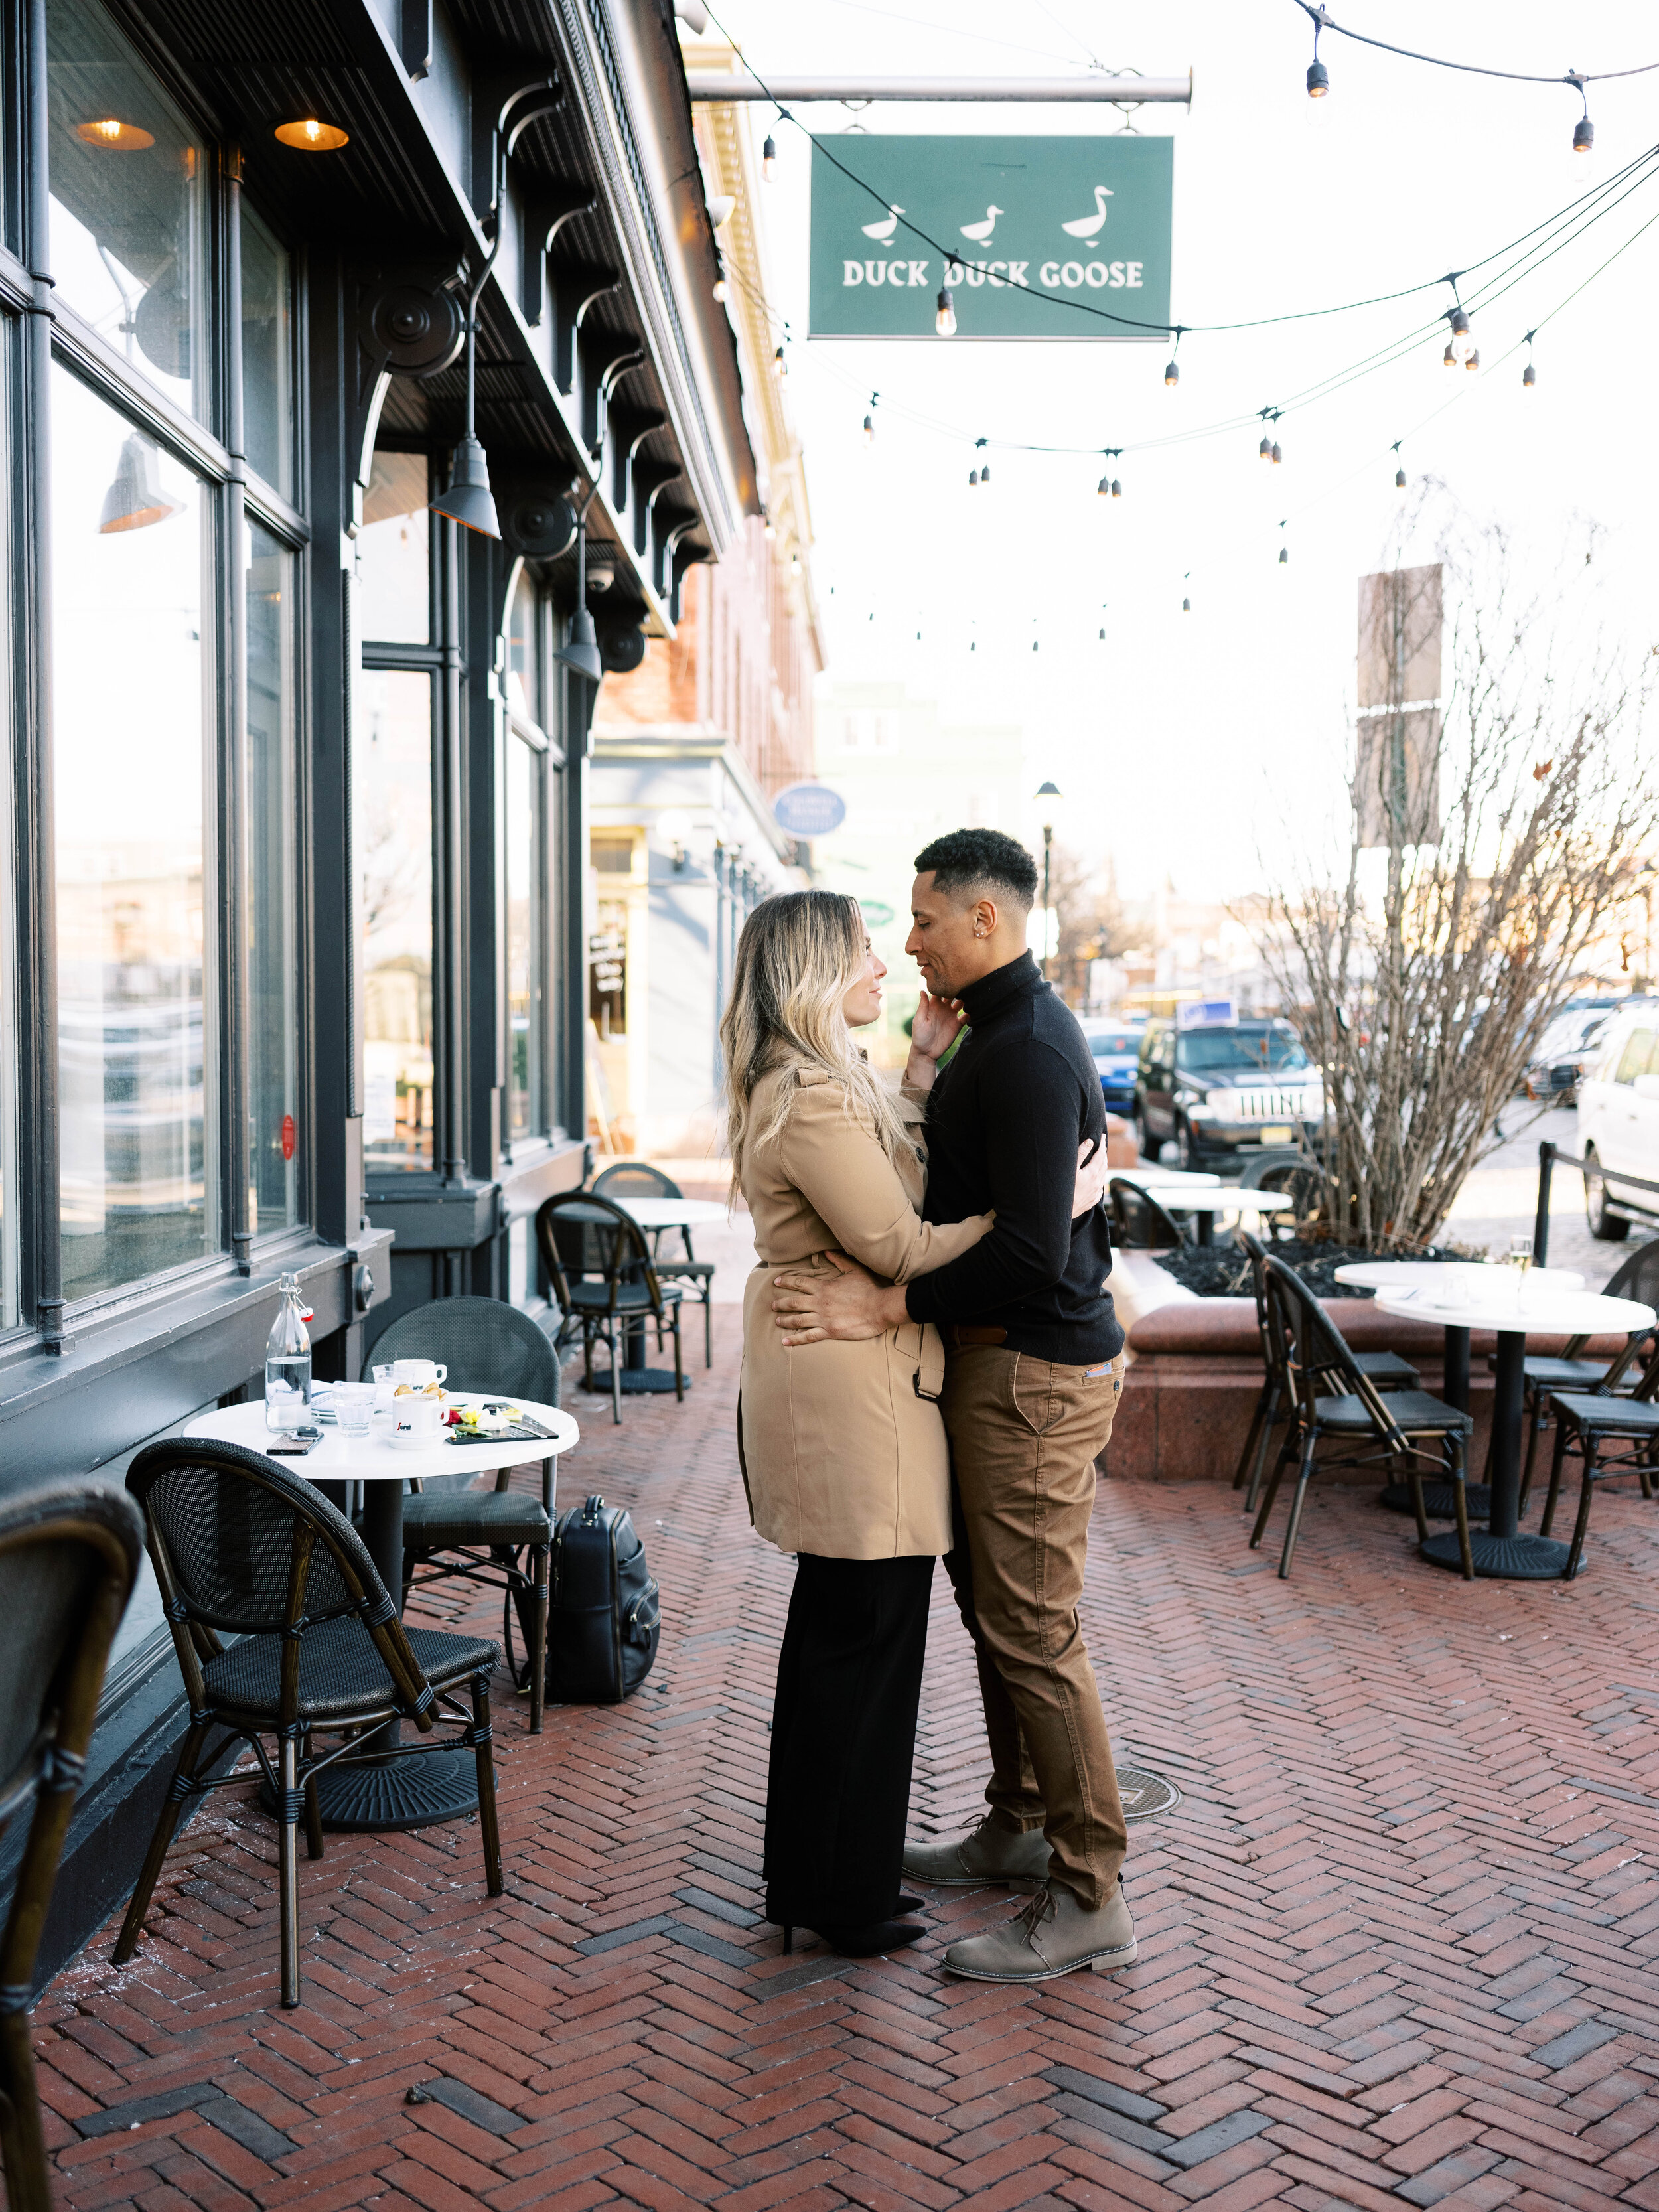 Relaxed Couples portrait session at a cafe in fells point, baltimore